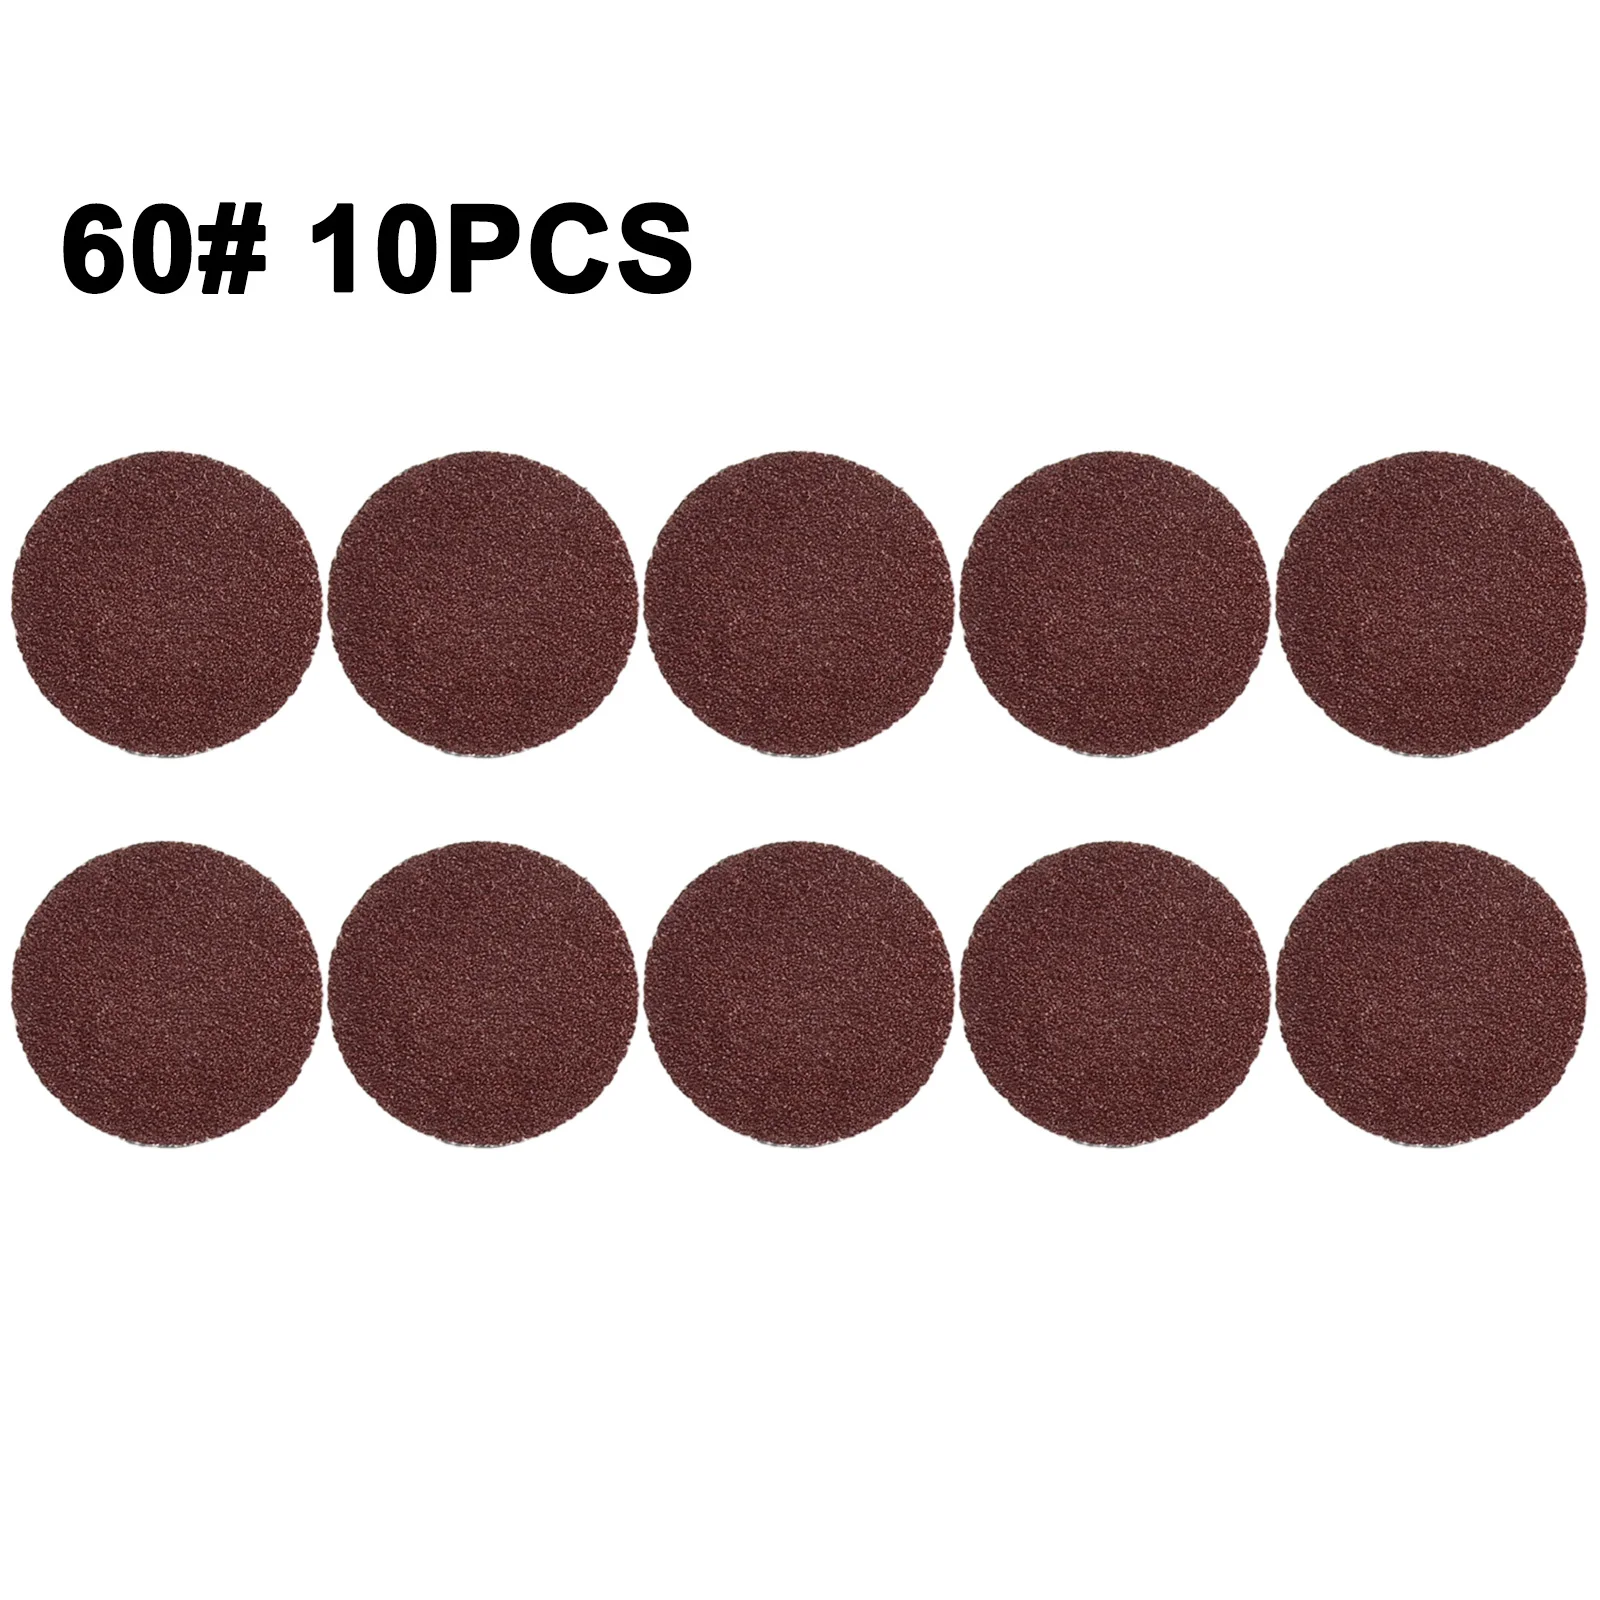 

10pcs 2inch 60/80/120# Sanding Discs Electric Drill Grinder Rotary Tools For Polishing Pad Sander Paper Disk Grit Power Tool